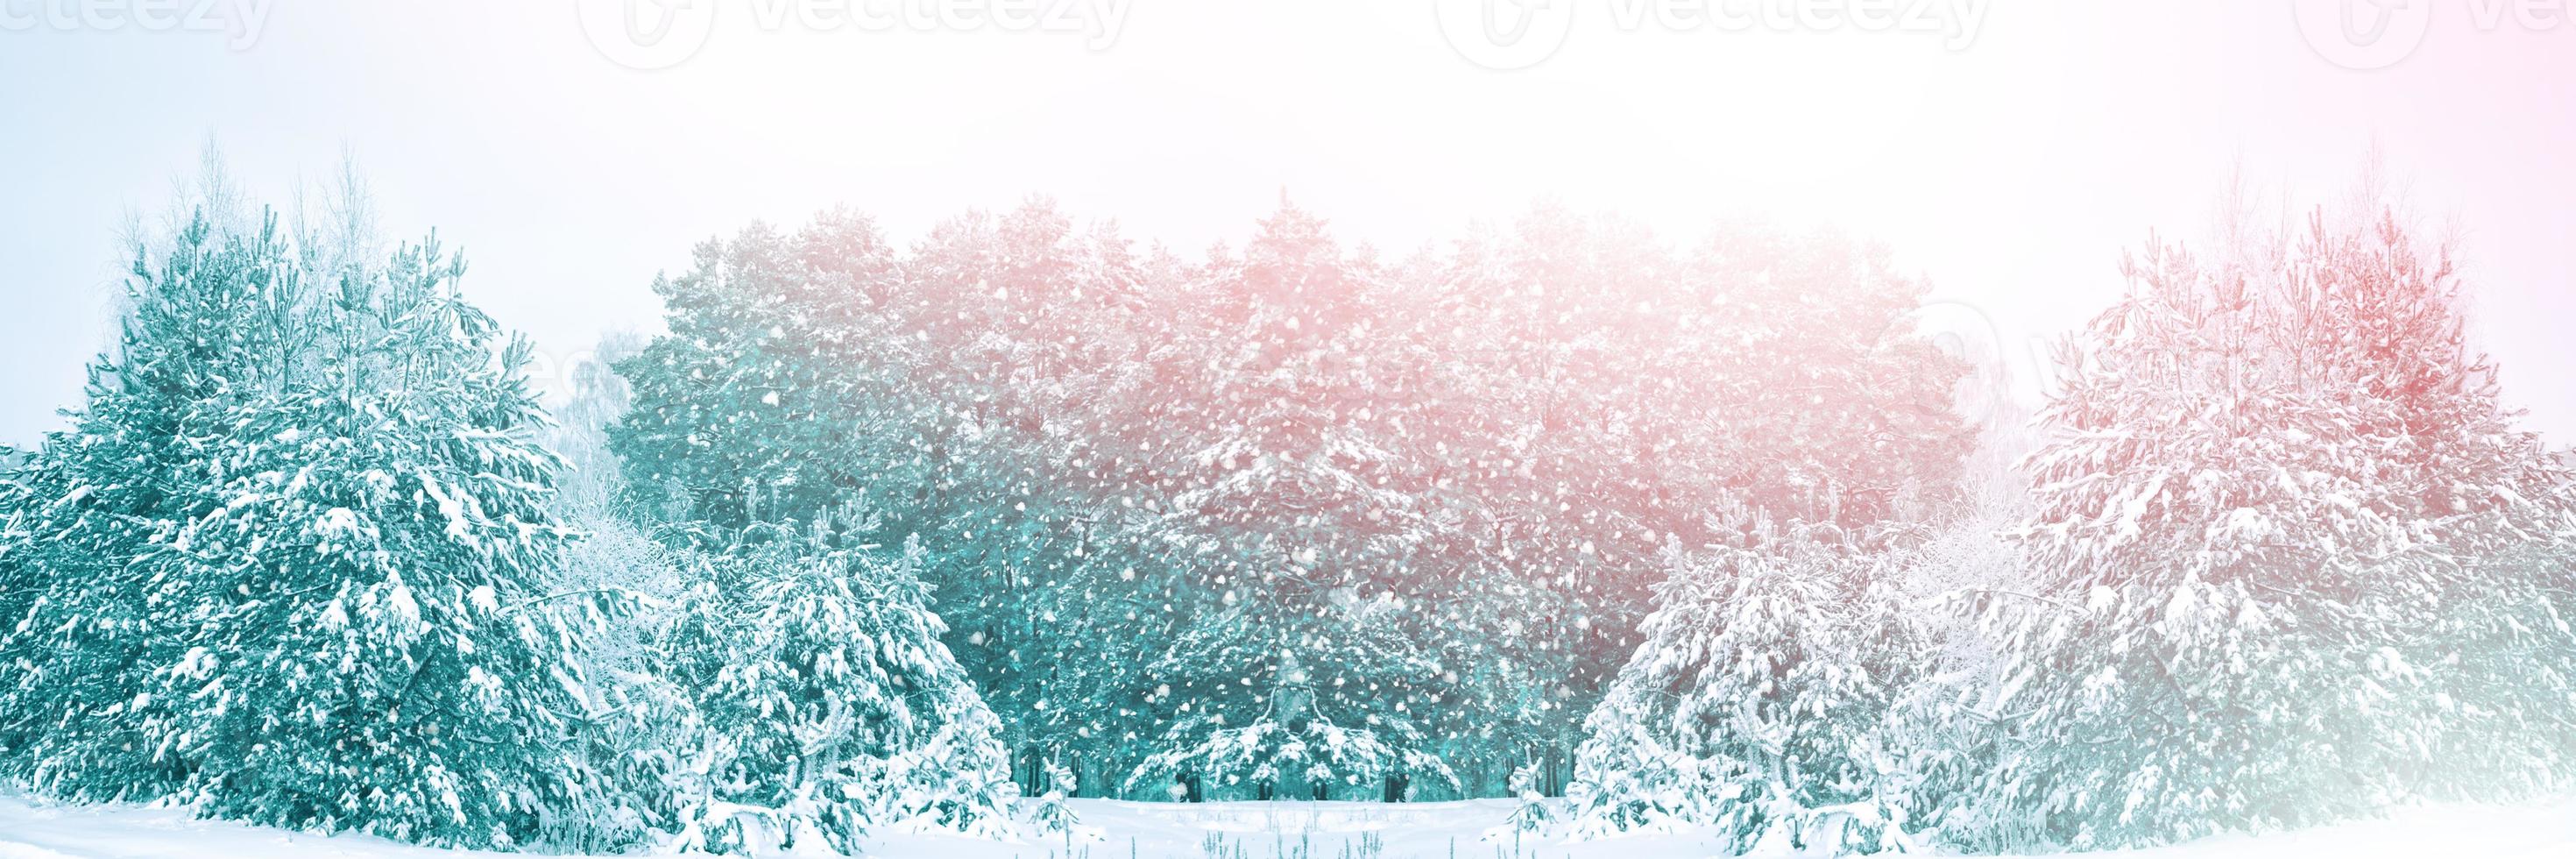 Blurred background. winter forest with snow covered trees. photo